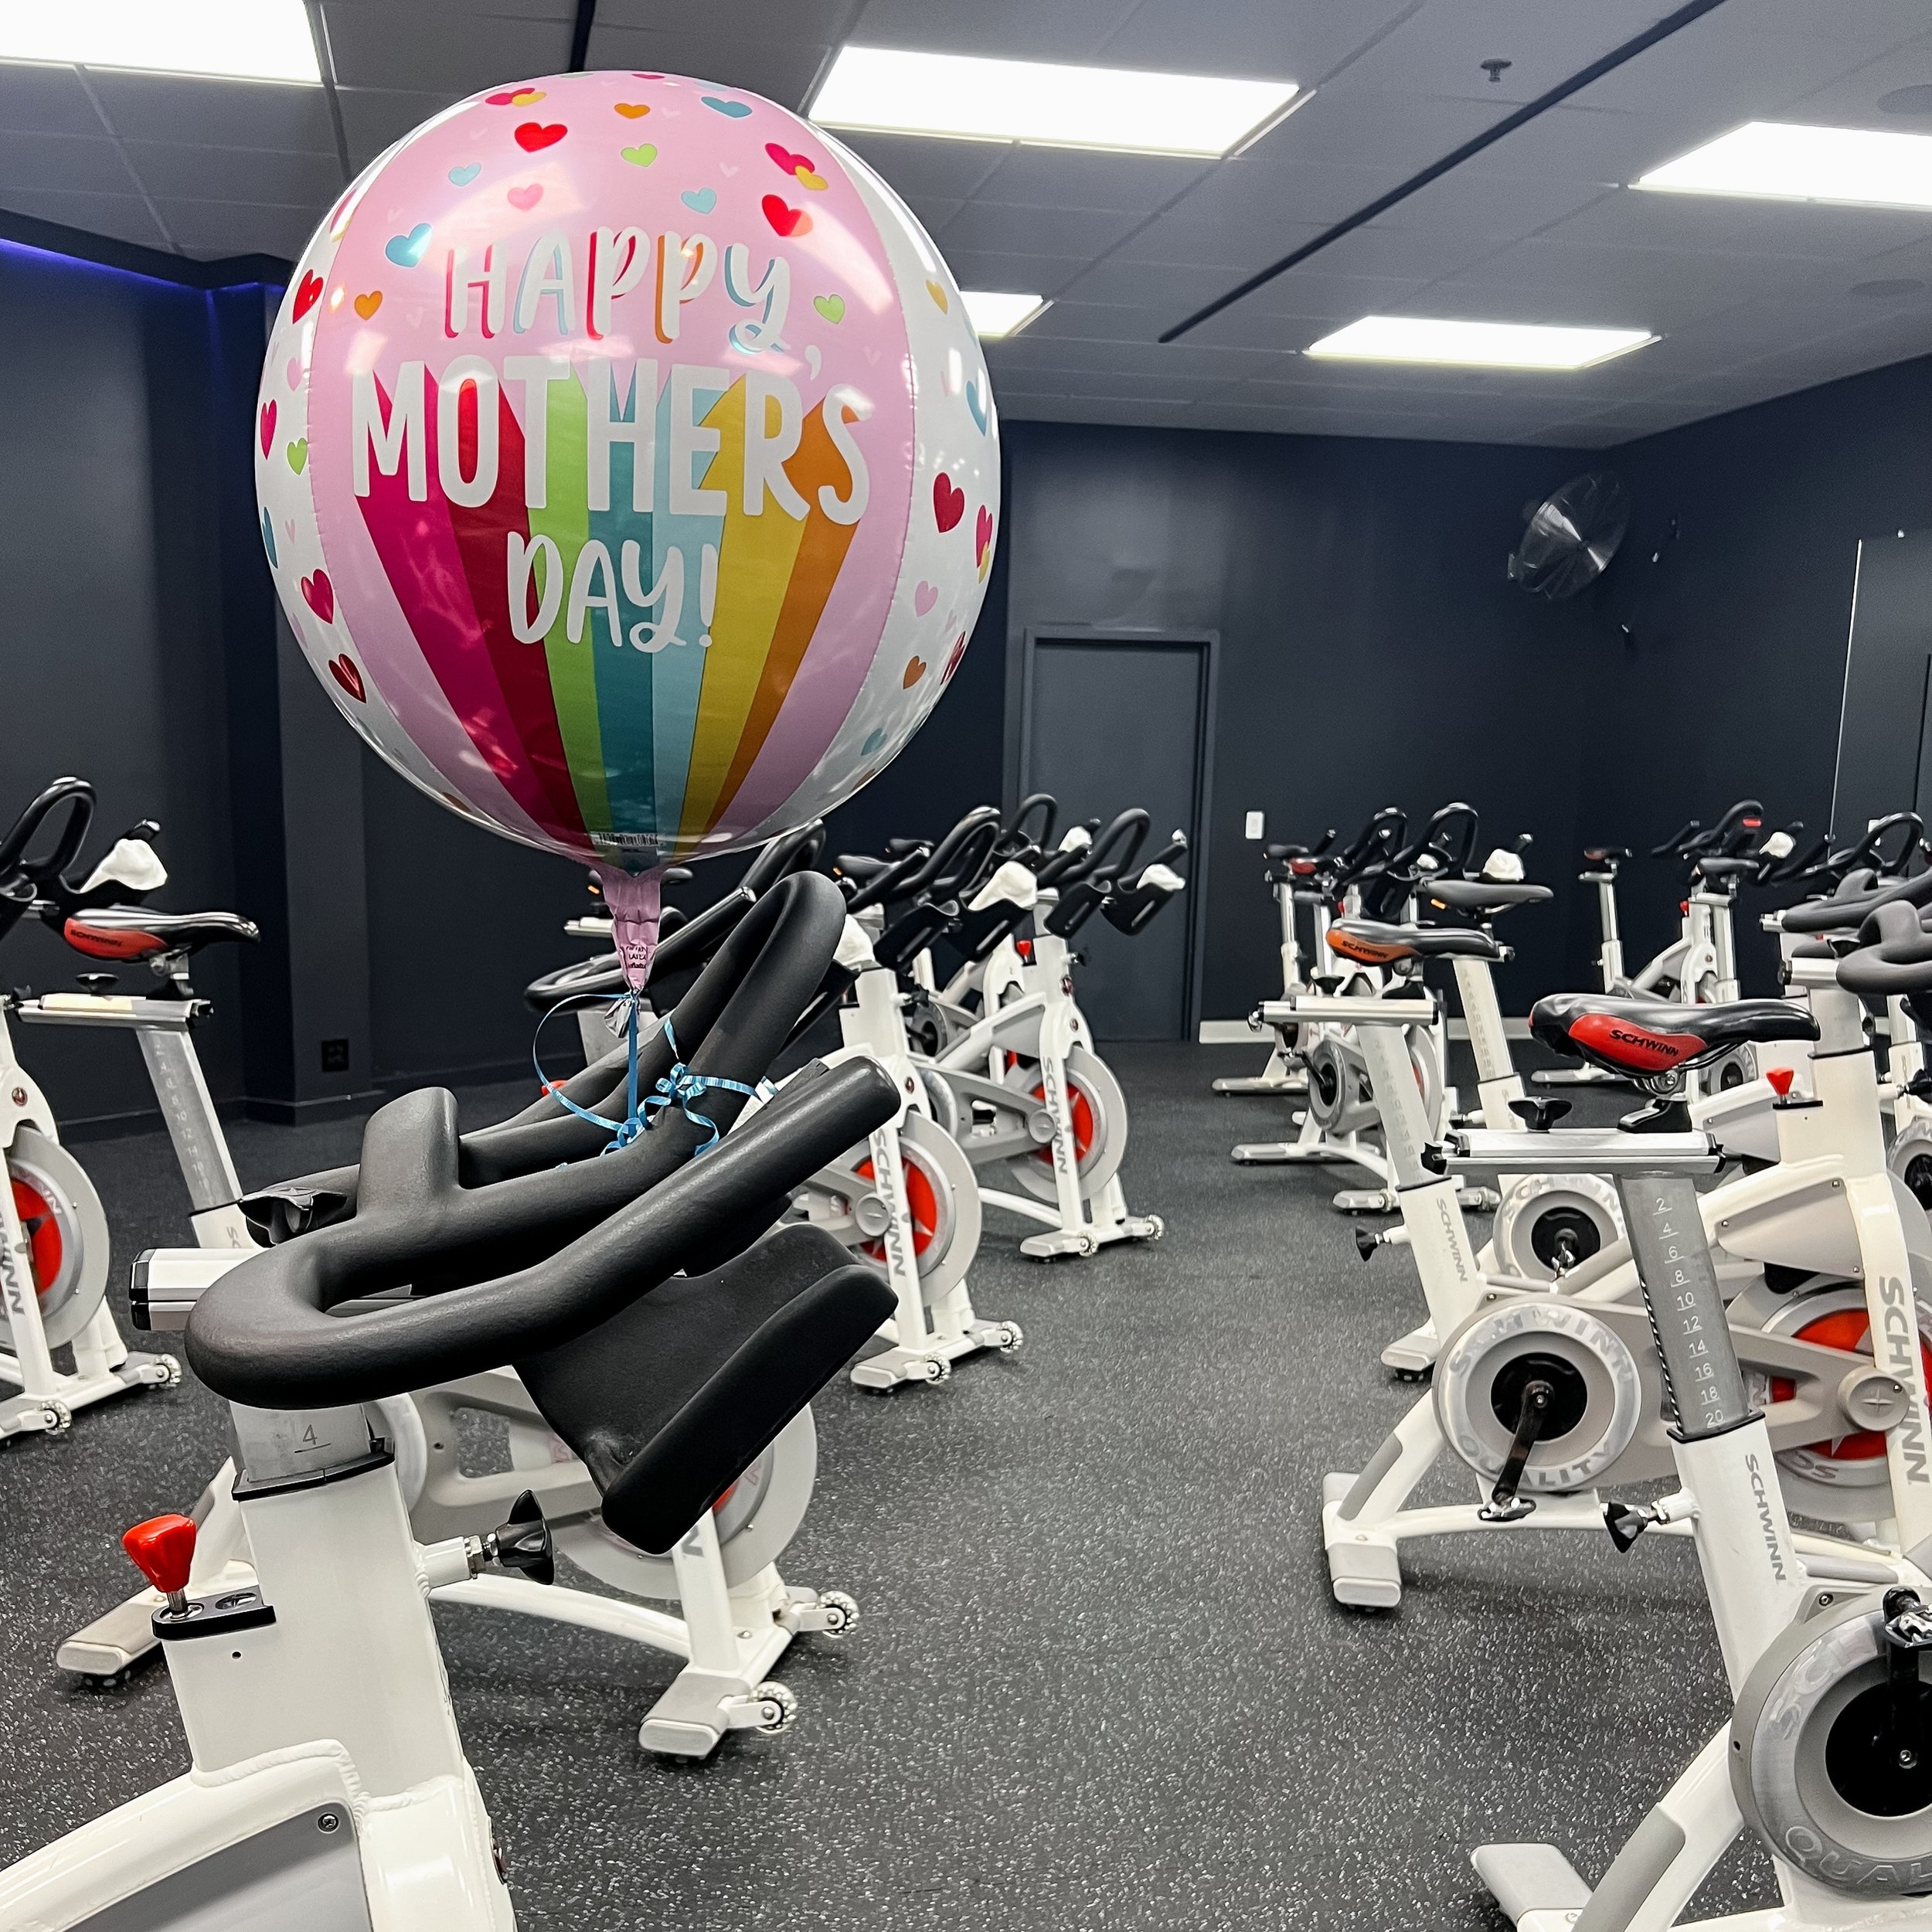 Happy Mother&rsquo;s Day to all of our Boost moms! 🌸🌼

#boostfitness #newtownct #mothersday